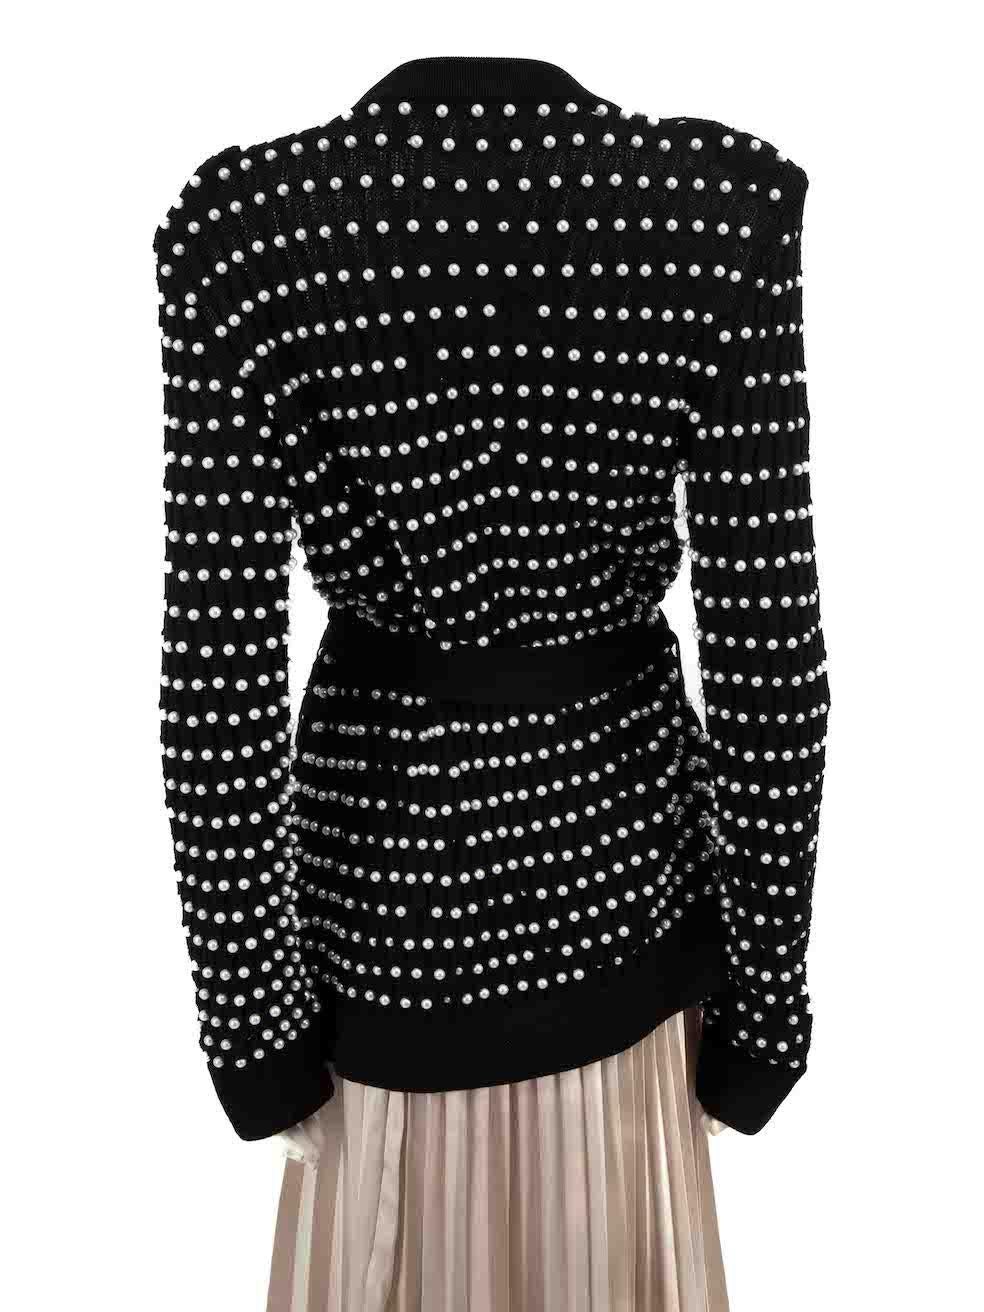 Balmain Black Knit Pearl Embellished Cardigan Size XL In Good Condition For Sale In London, GB